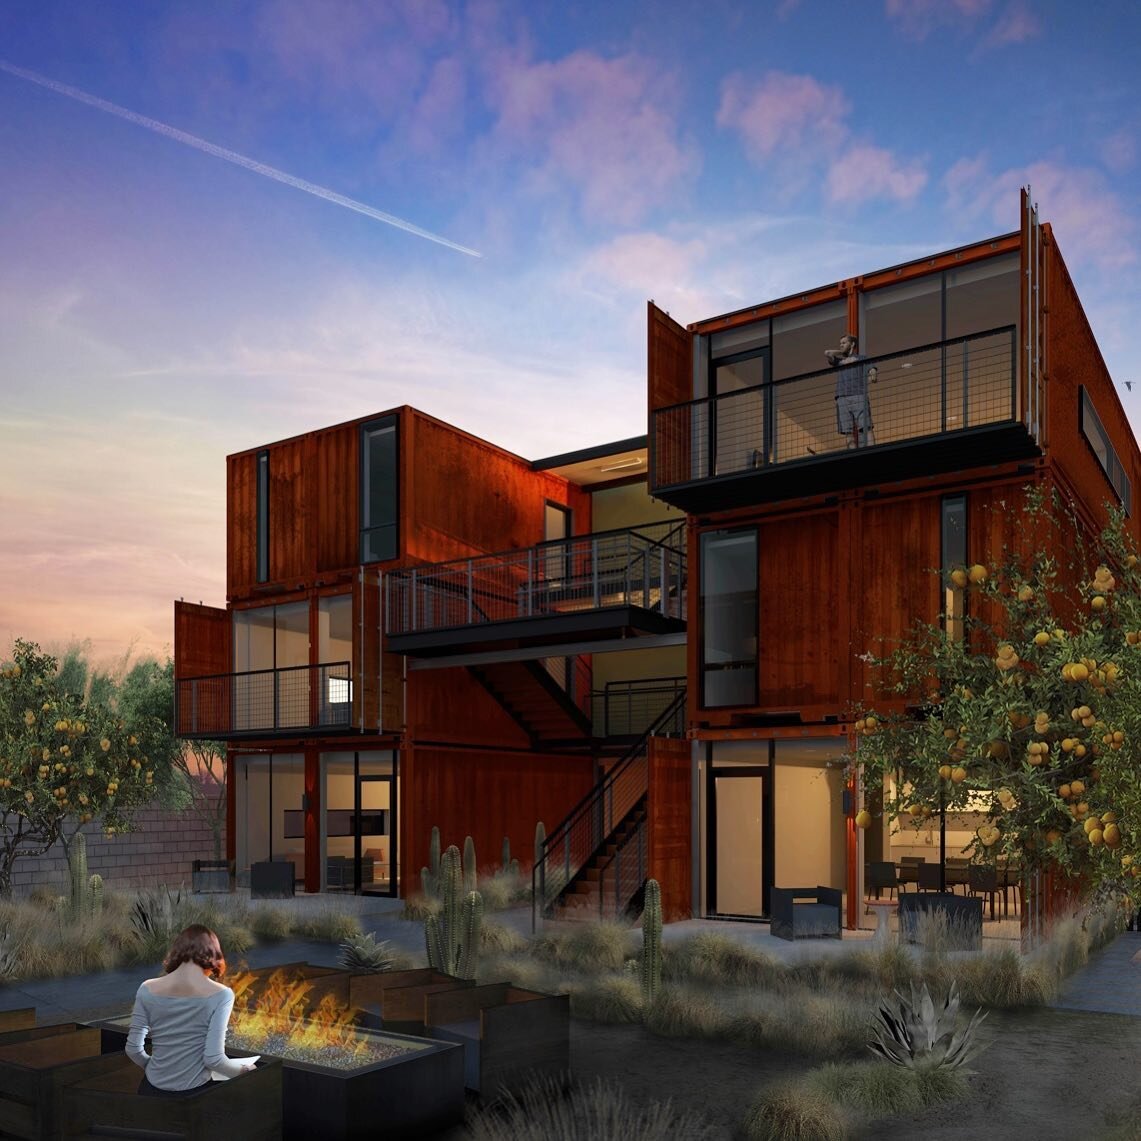 Coming late 2020- modern, spacious living in re-purposed sustainable shipping containers!  See website in bio